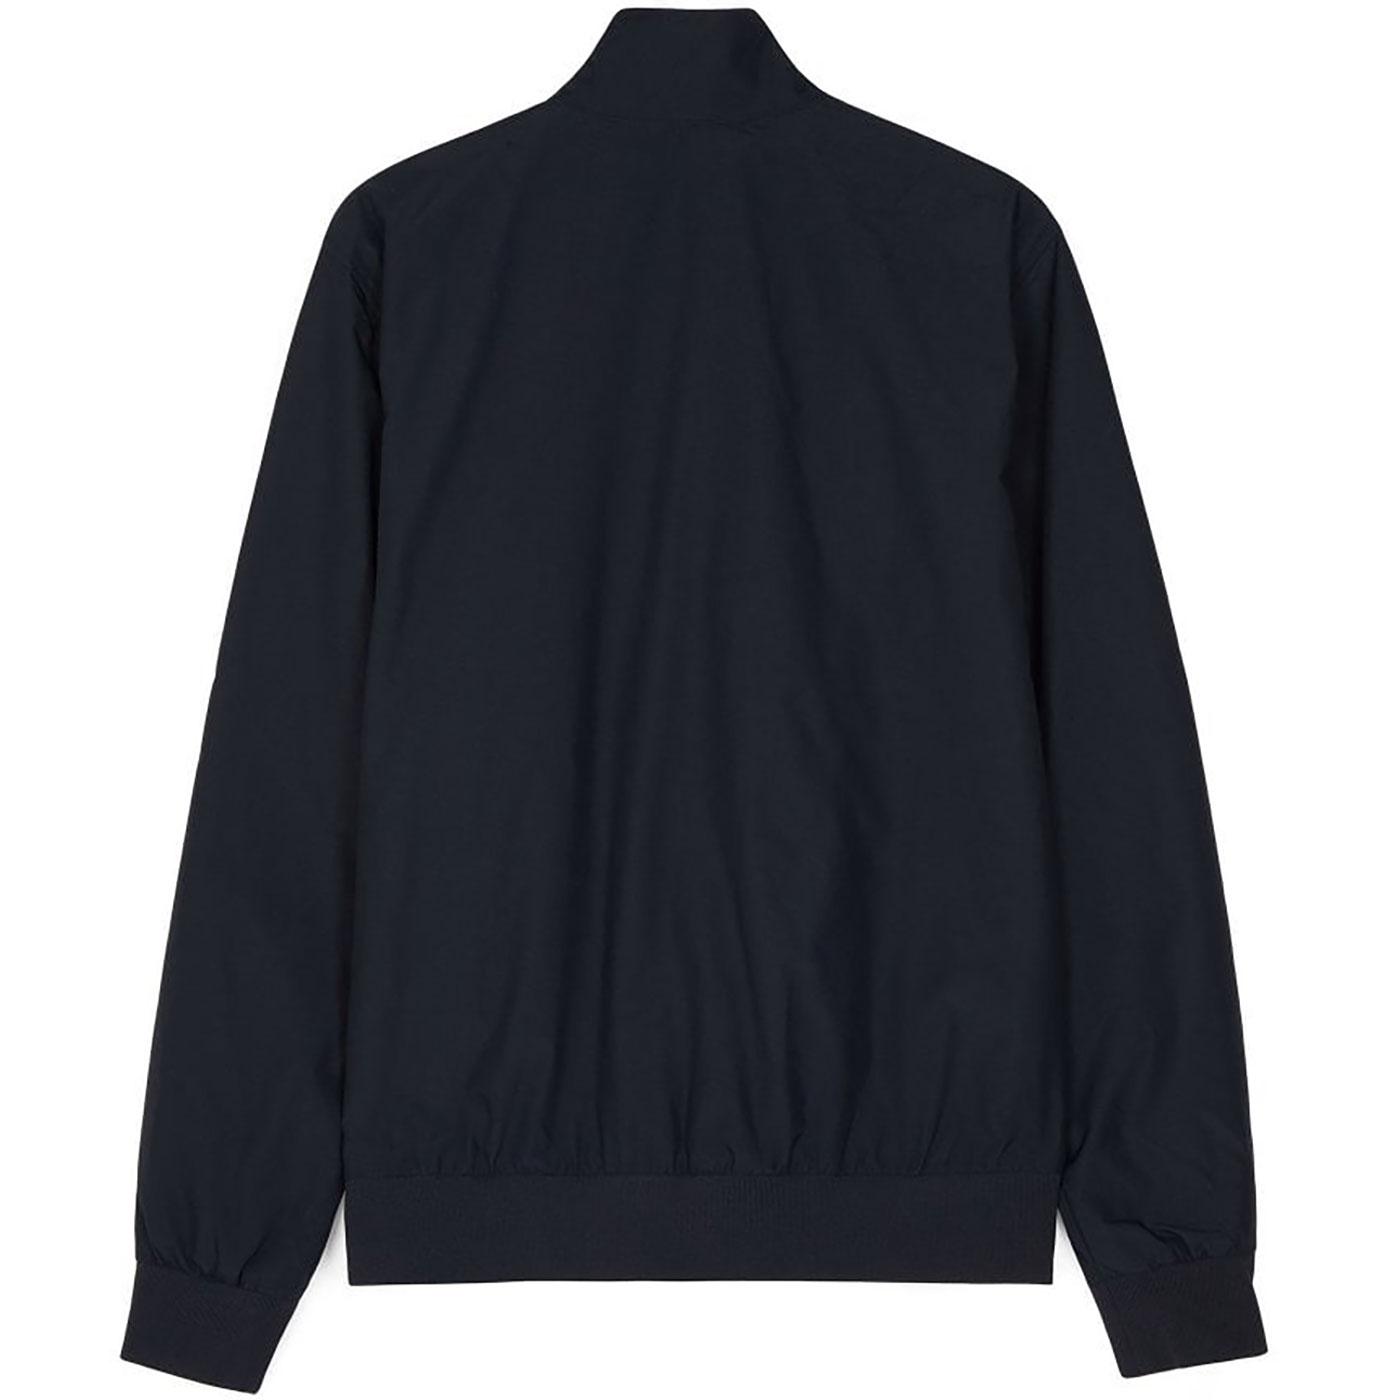 FRED PERRY 'Brentham' Tipped Windbreaker Jacket in Navy